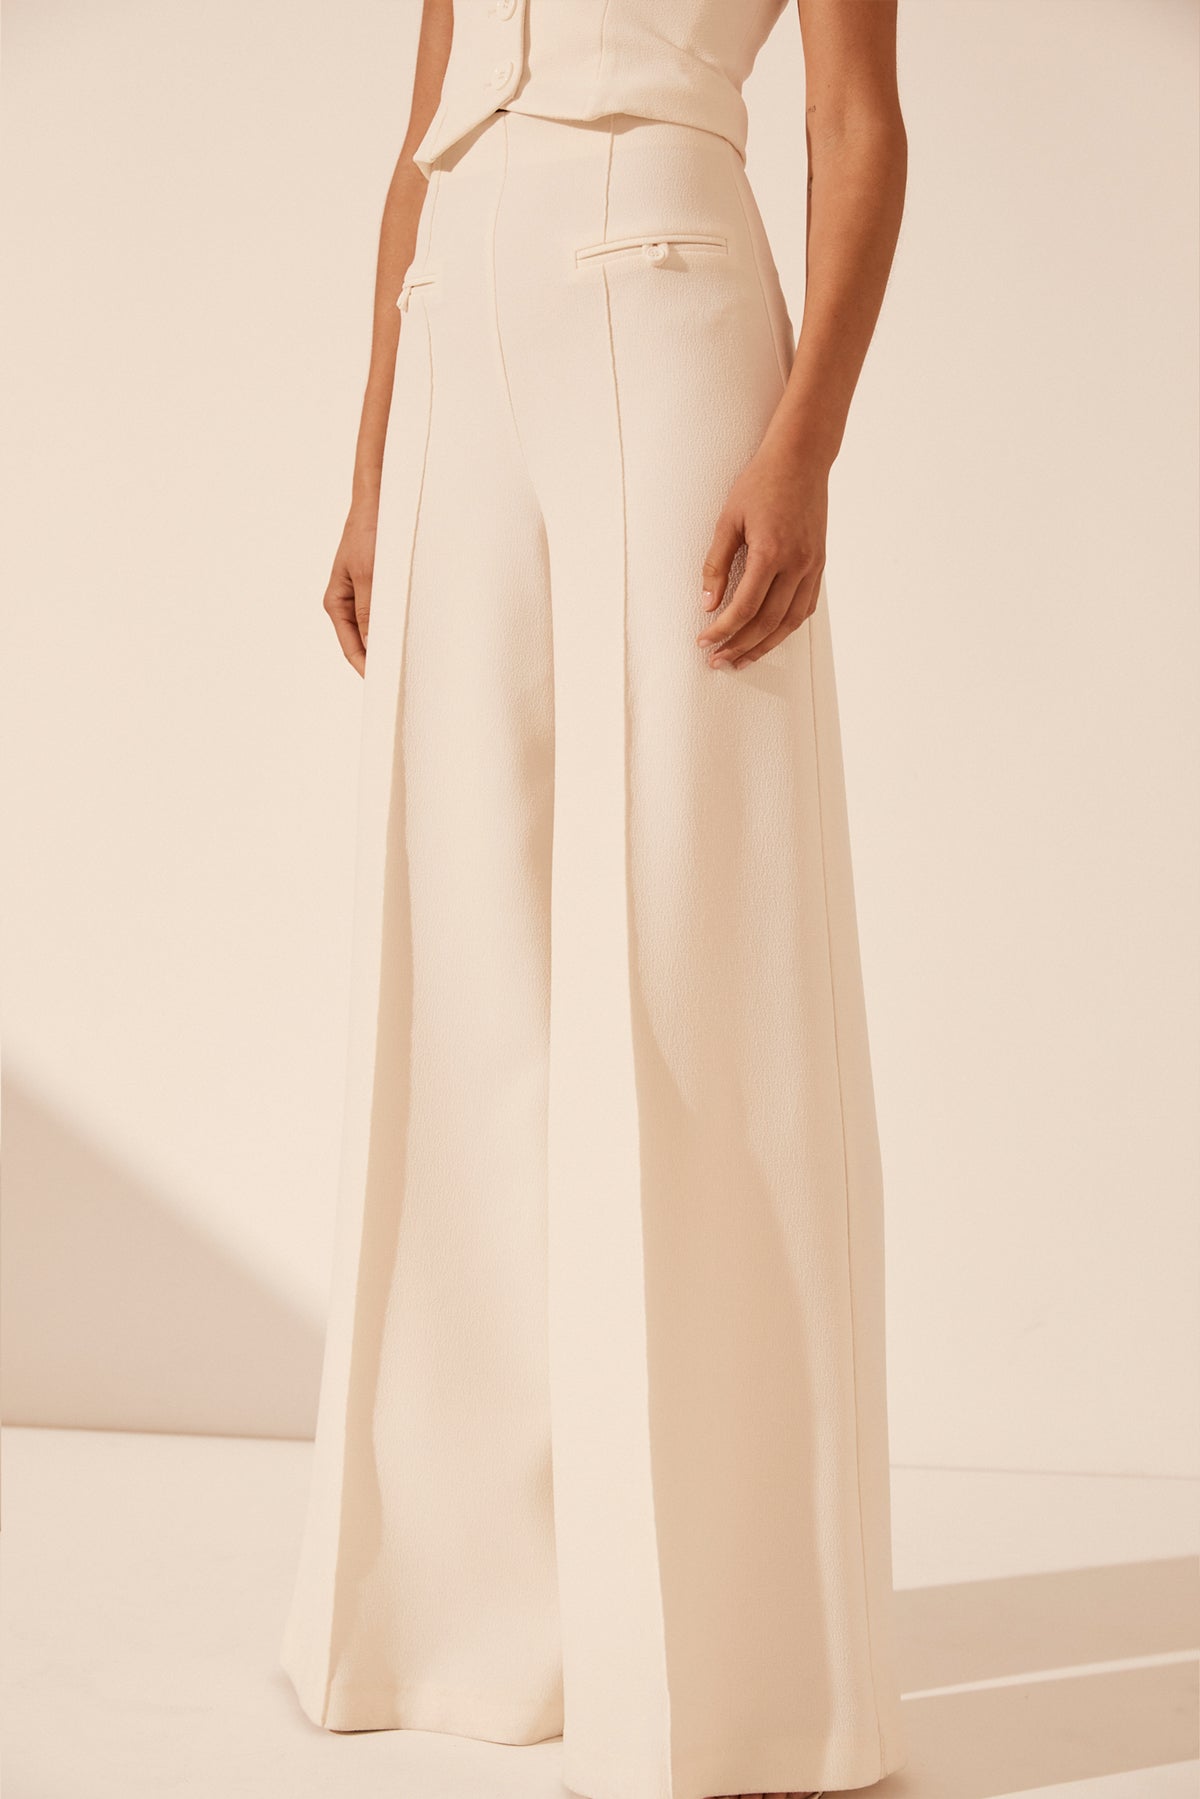 ASOS EDITION tailored pants in camel | ASOS